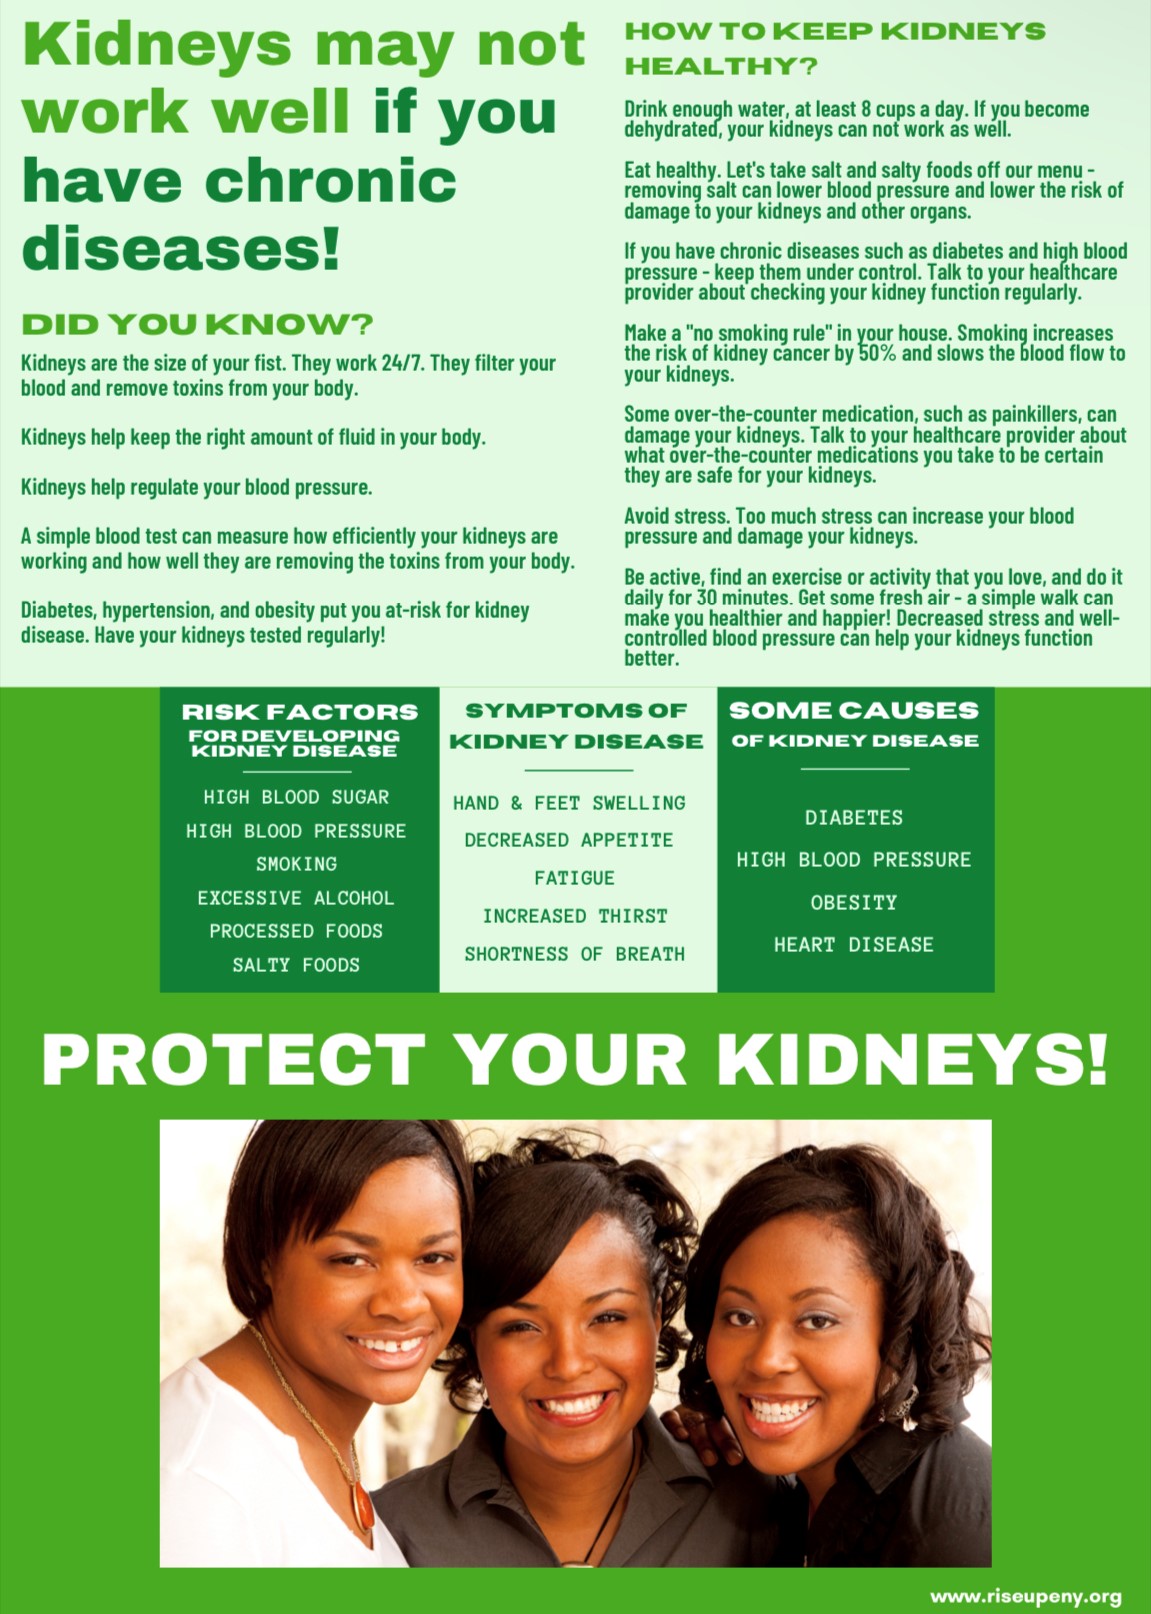 March is National Kidney Month!